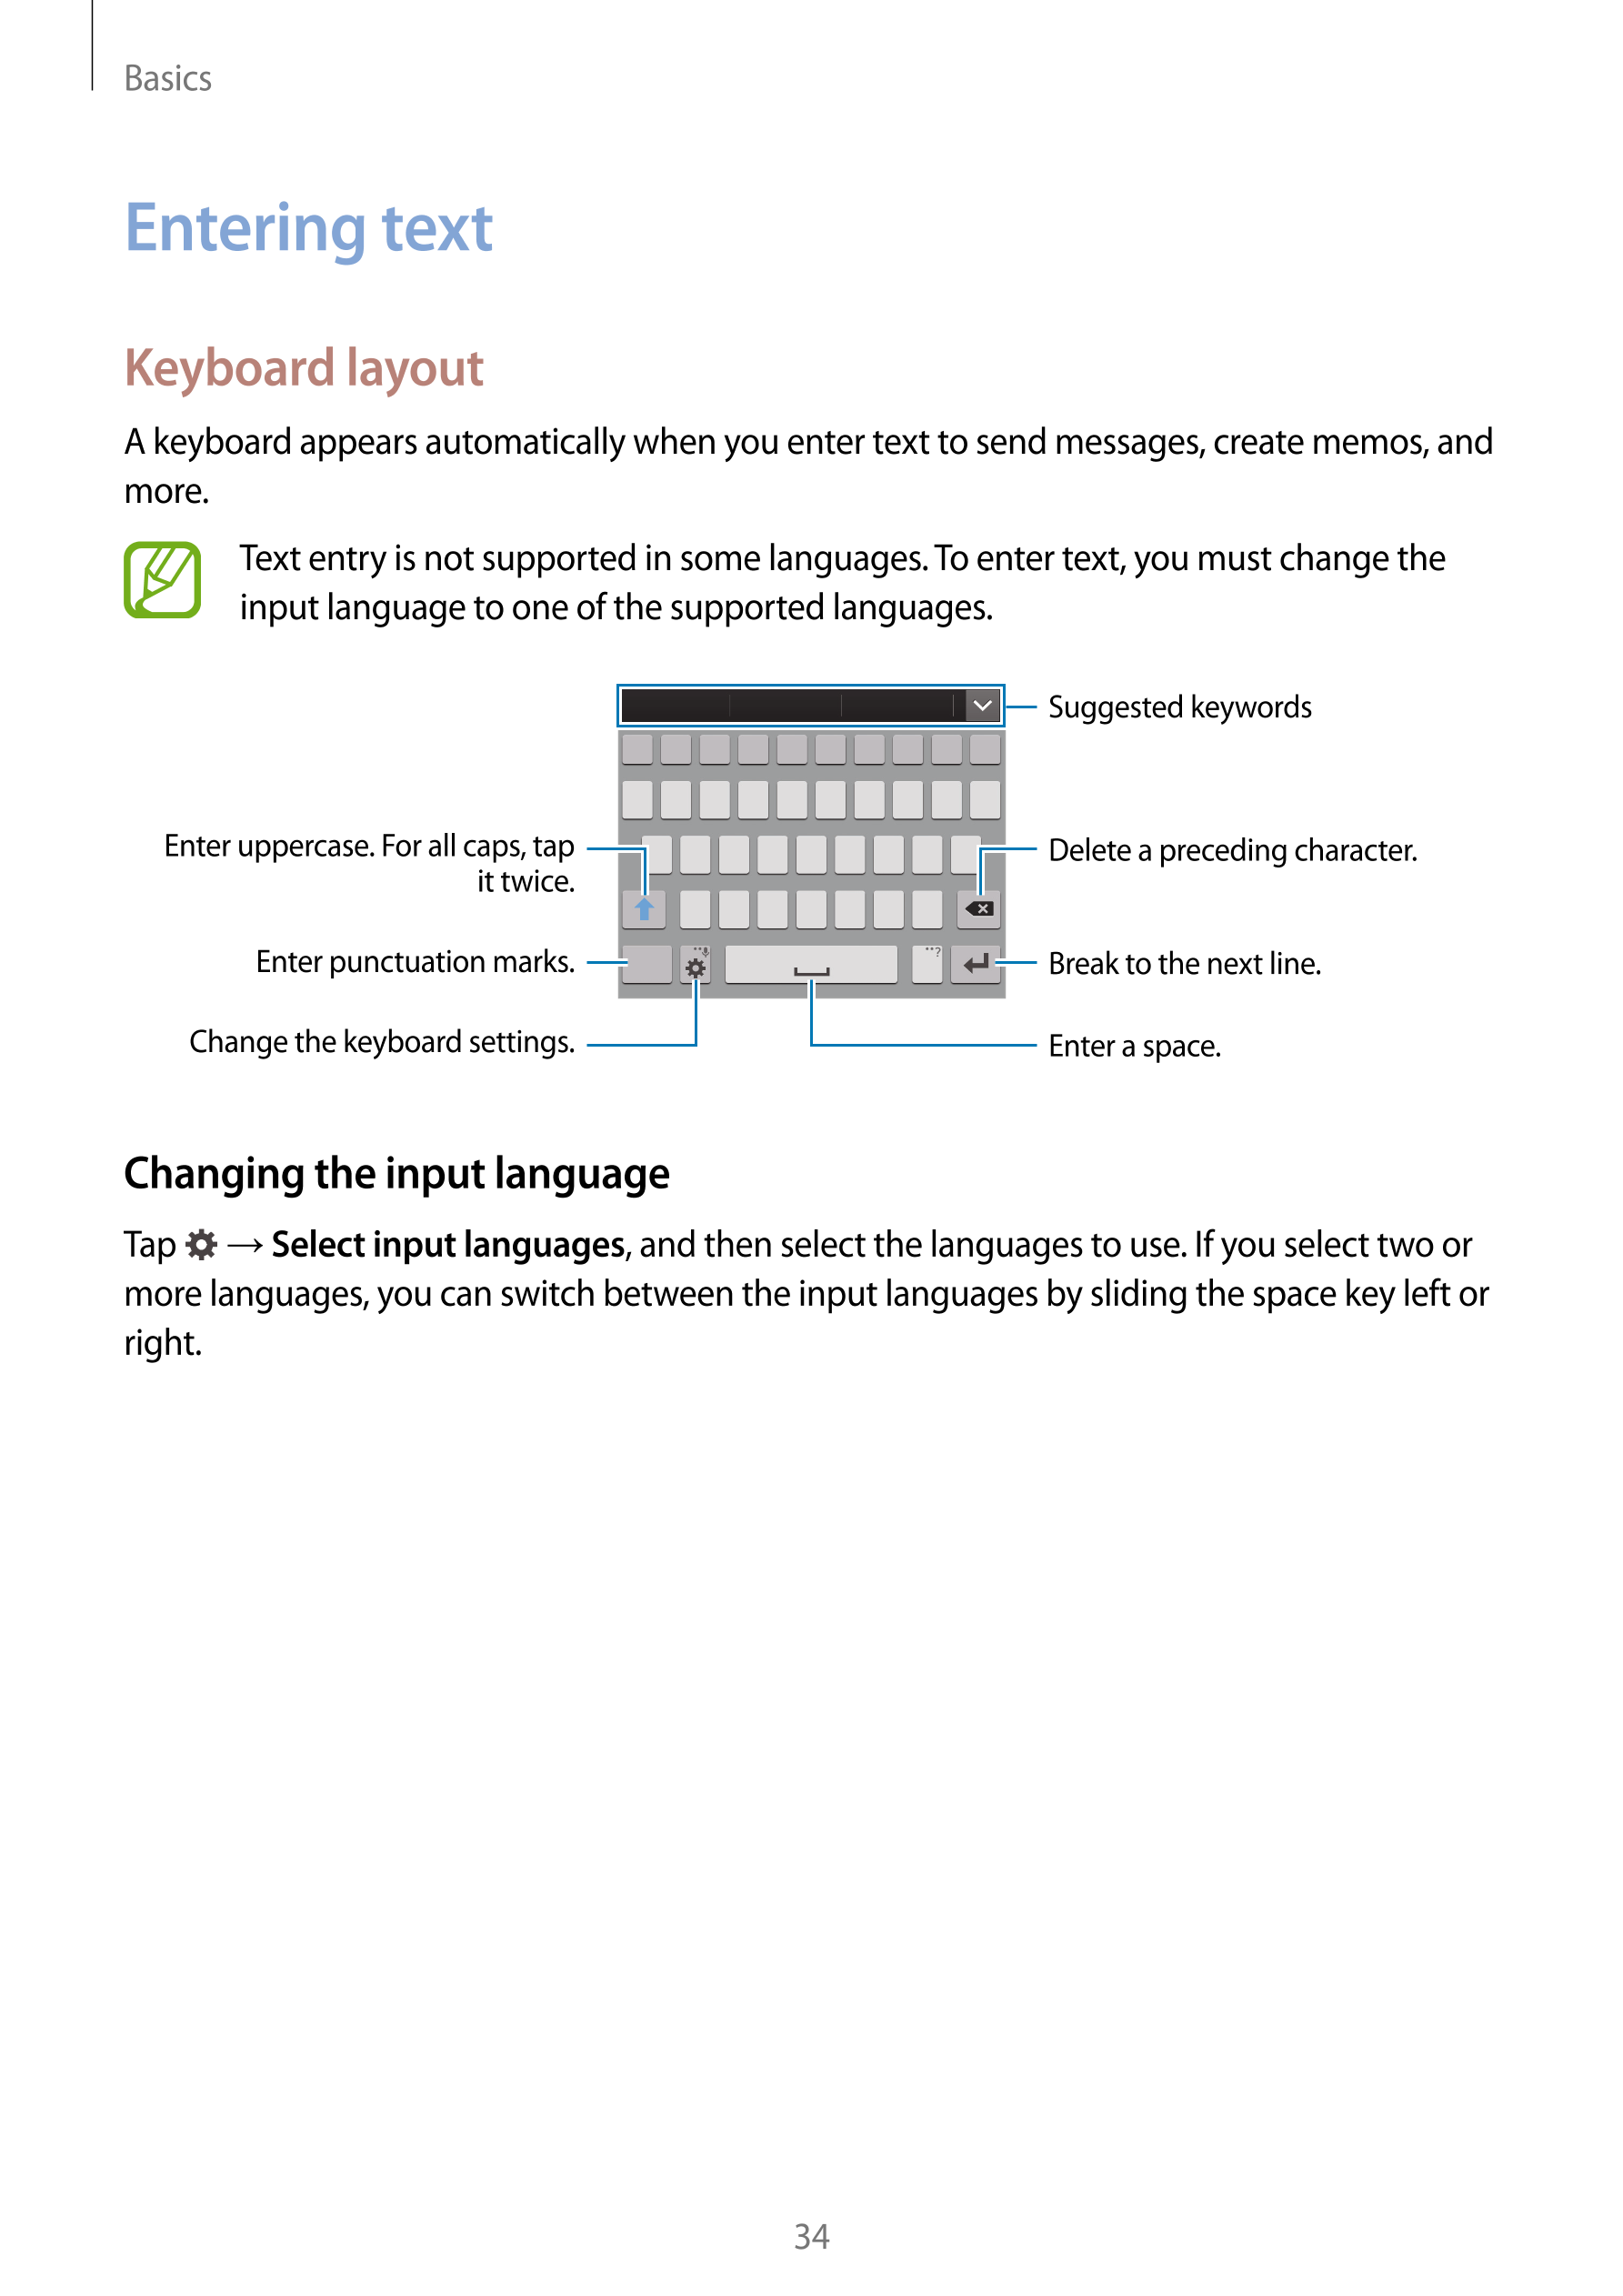 Basics
Entering text
Keyboard layout
A keyboard appears automatically when you enter text to send messages, create memos, and 
m